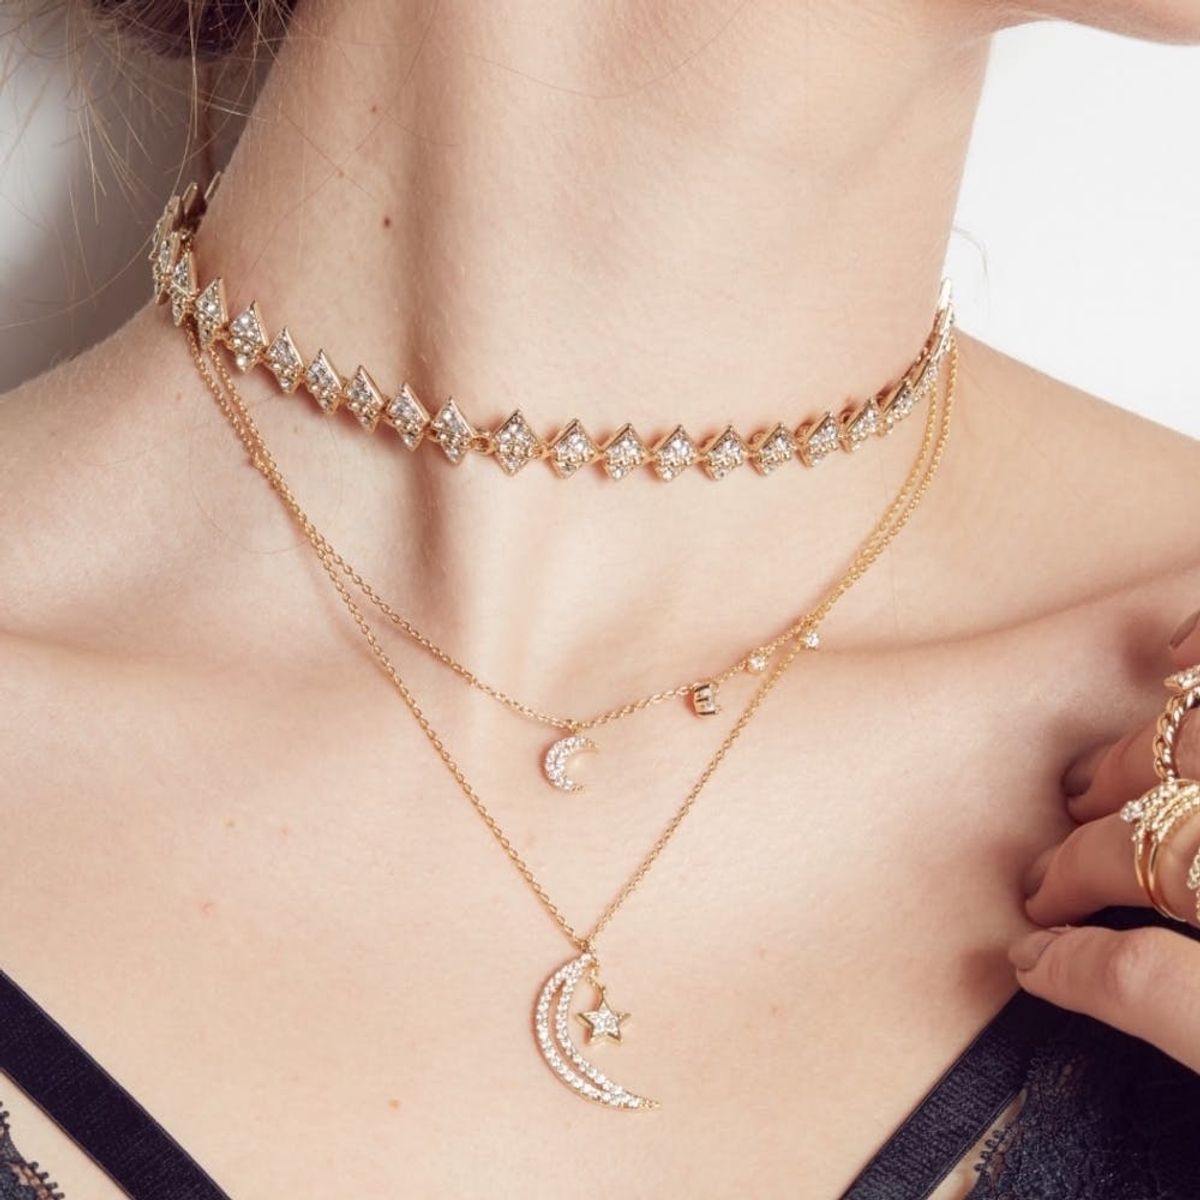 12 Affordable Jewelry Brands You Should Be Shopping RN